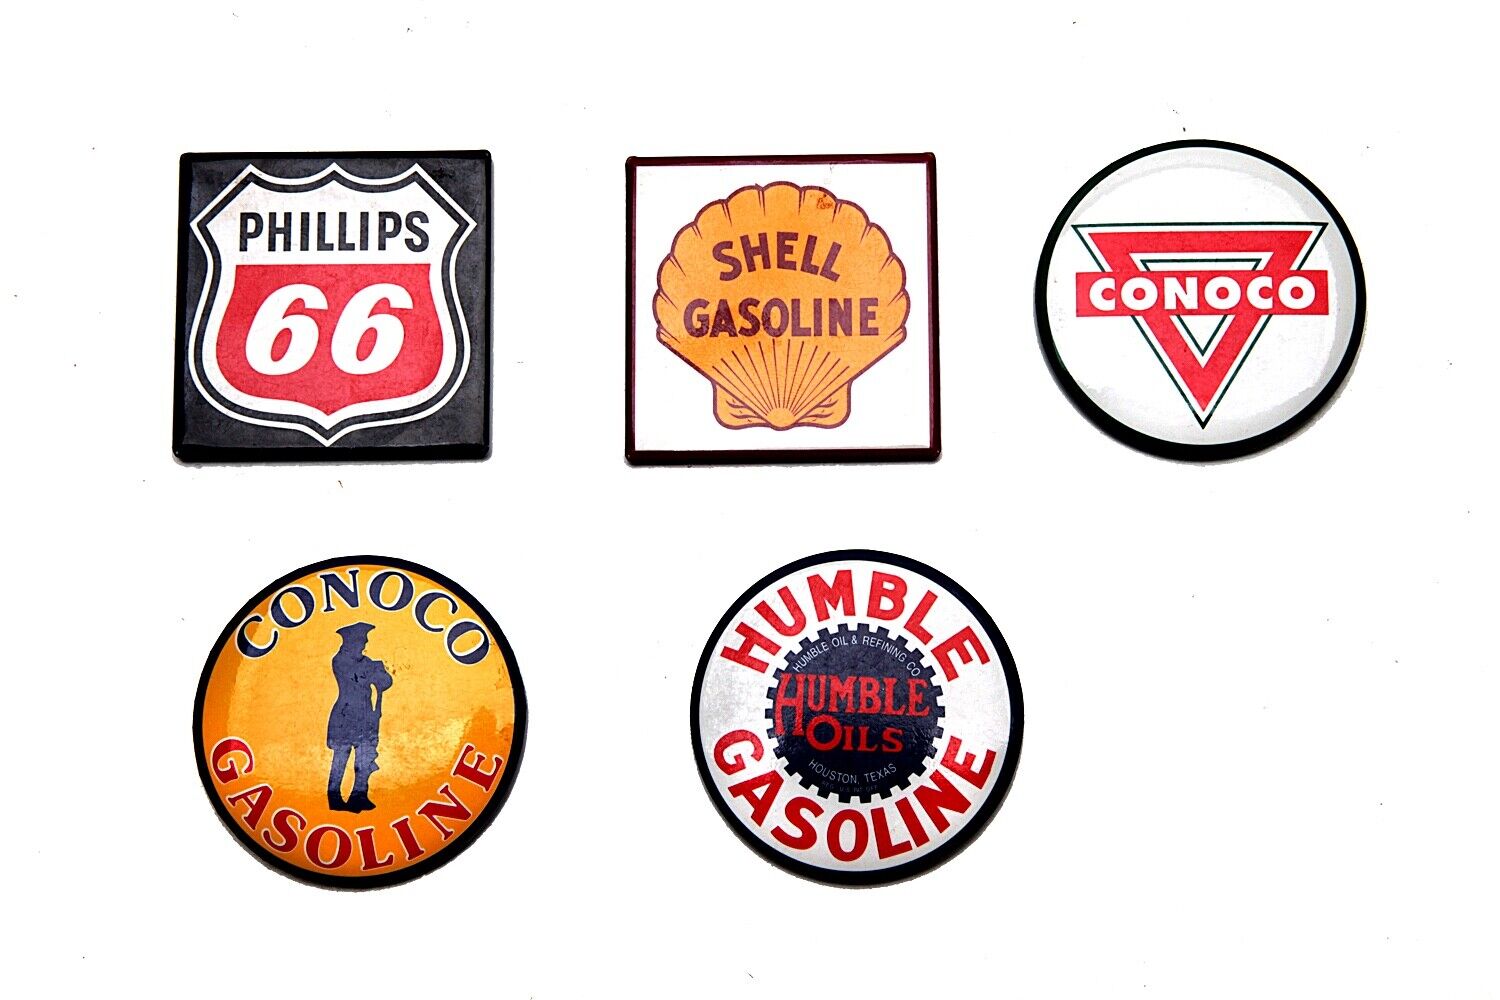 Lot of 5 Gasoline Company Magnets Humble, Conoco, Shell, Phillips